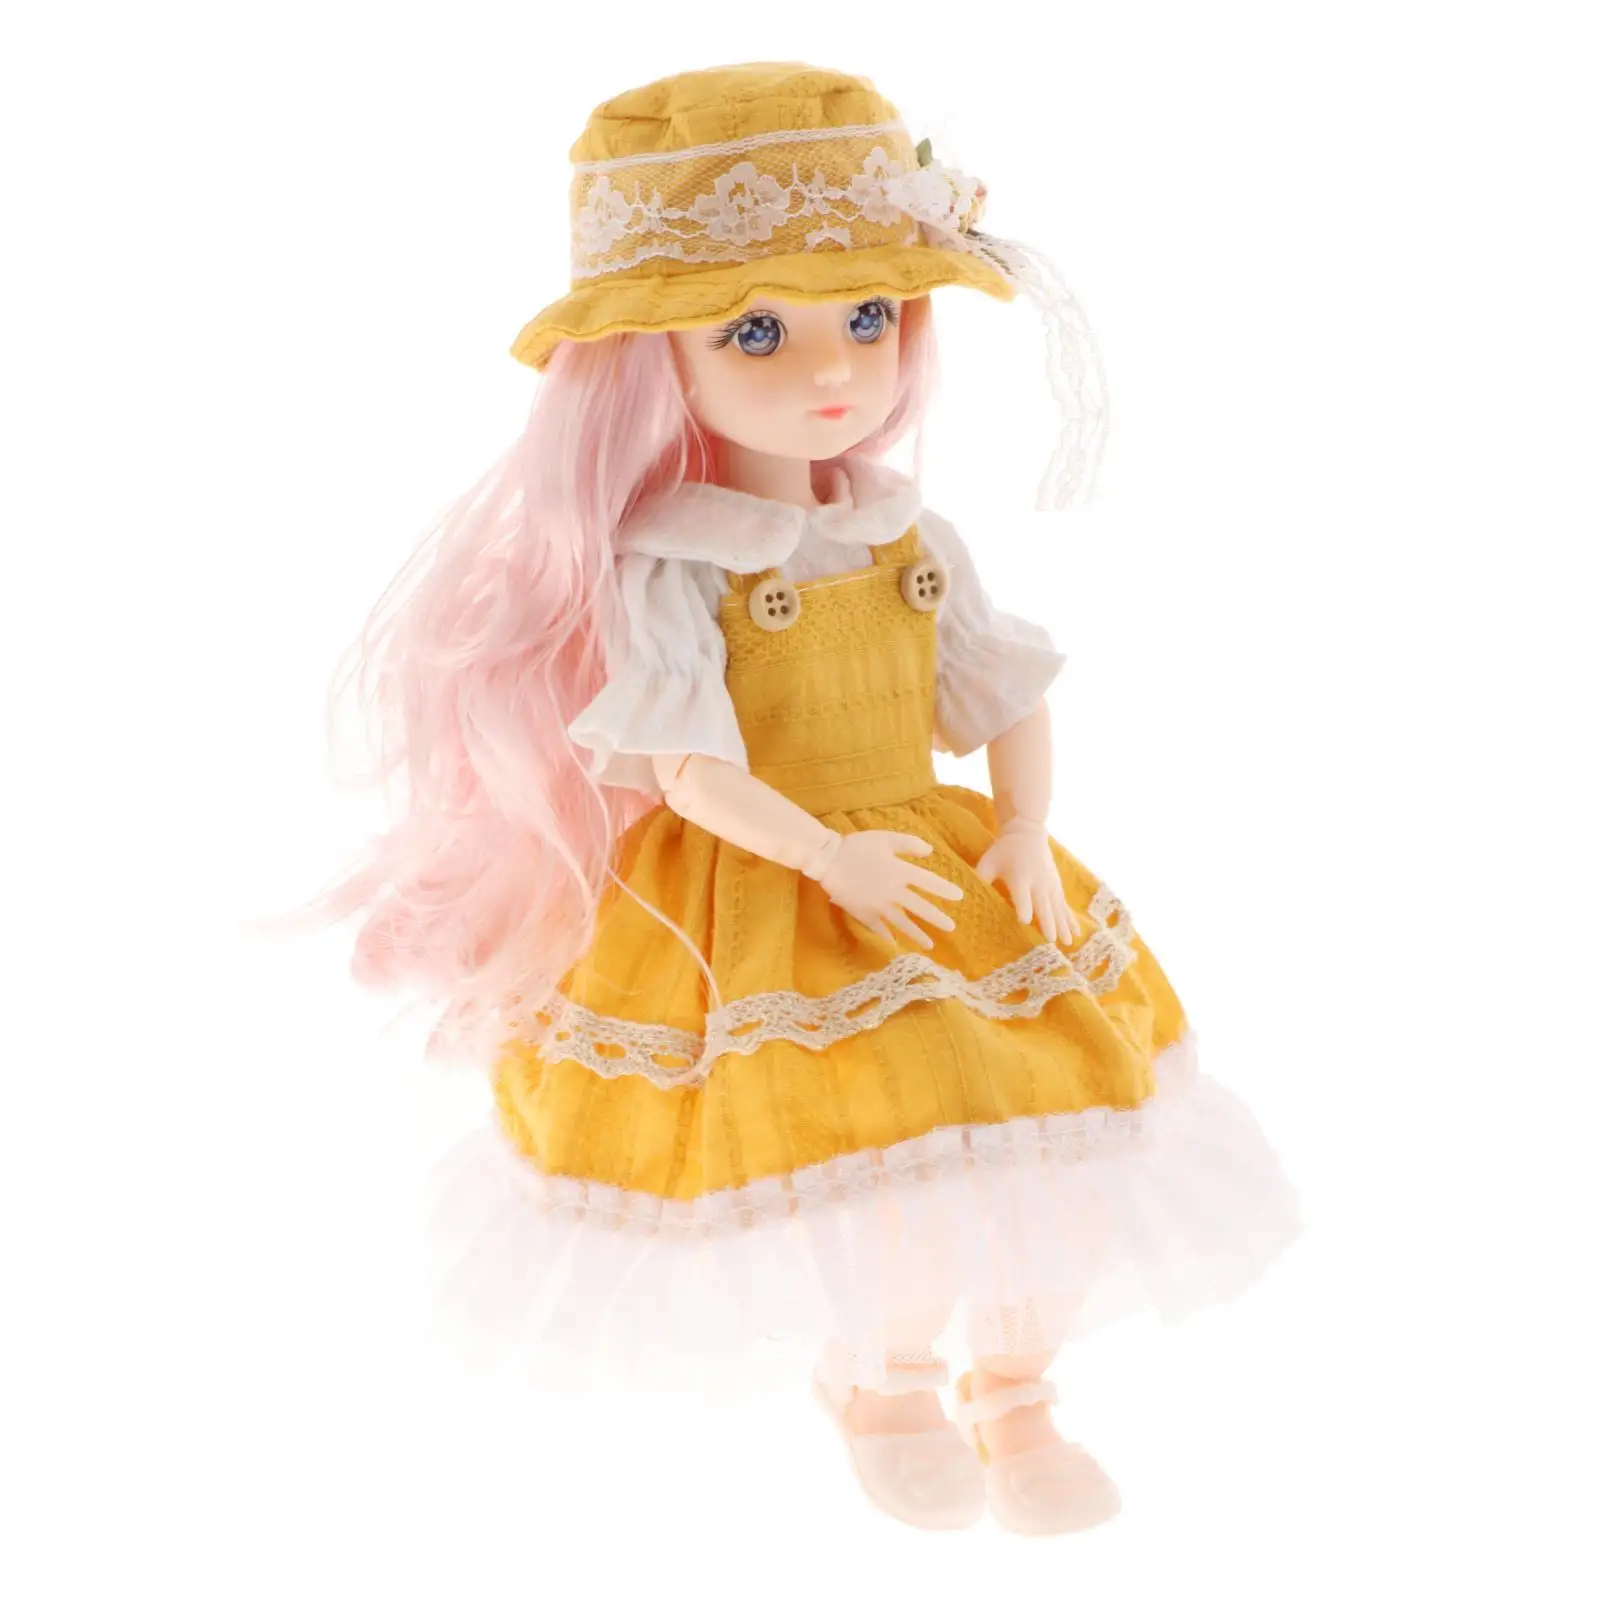 Doll Body Ball Jointed Dolls Change Dress Dolls Girls` Toys Ball Jointed Doll for Birthday Gift